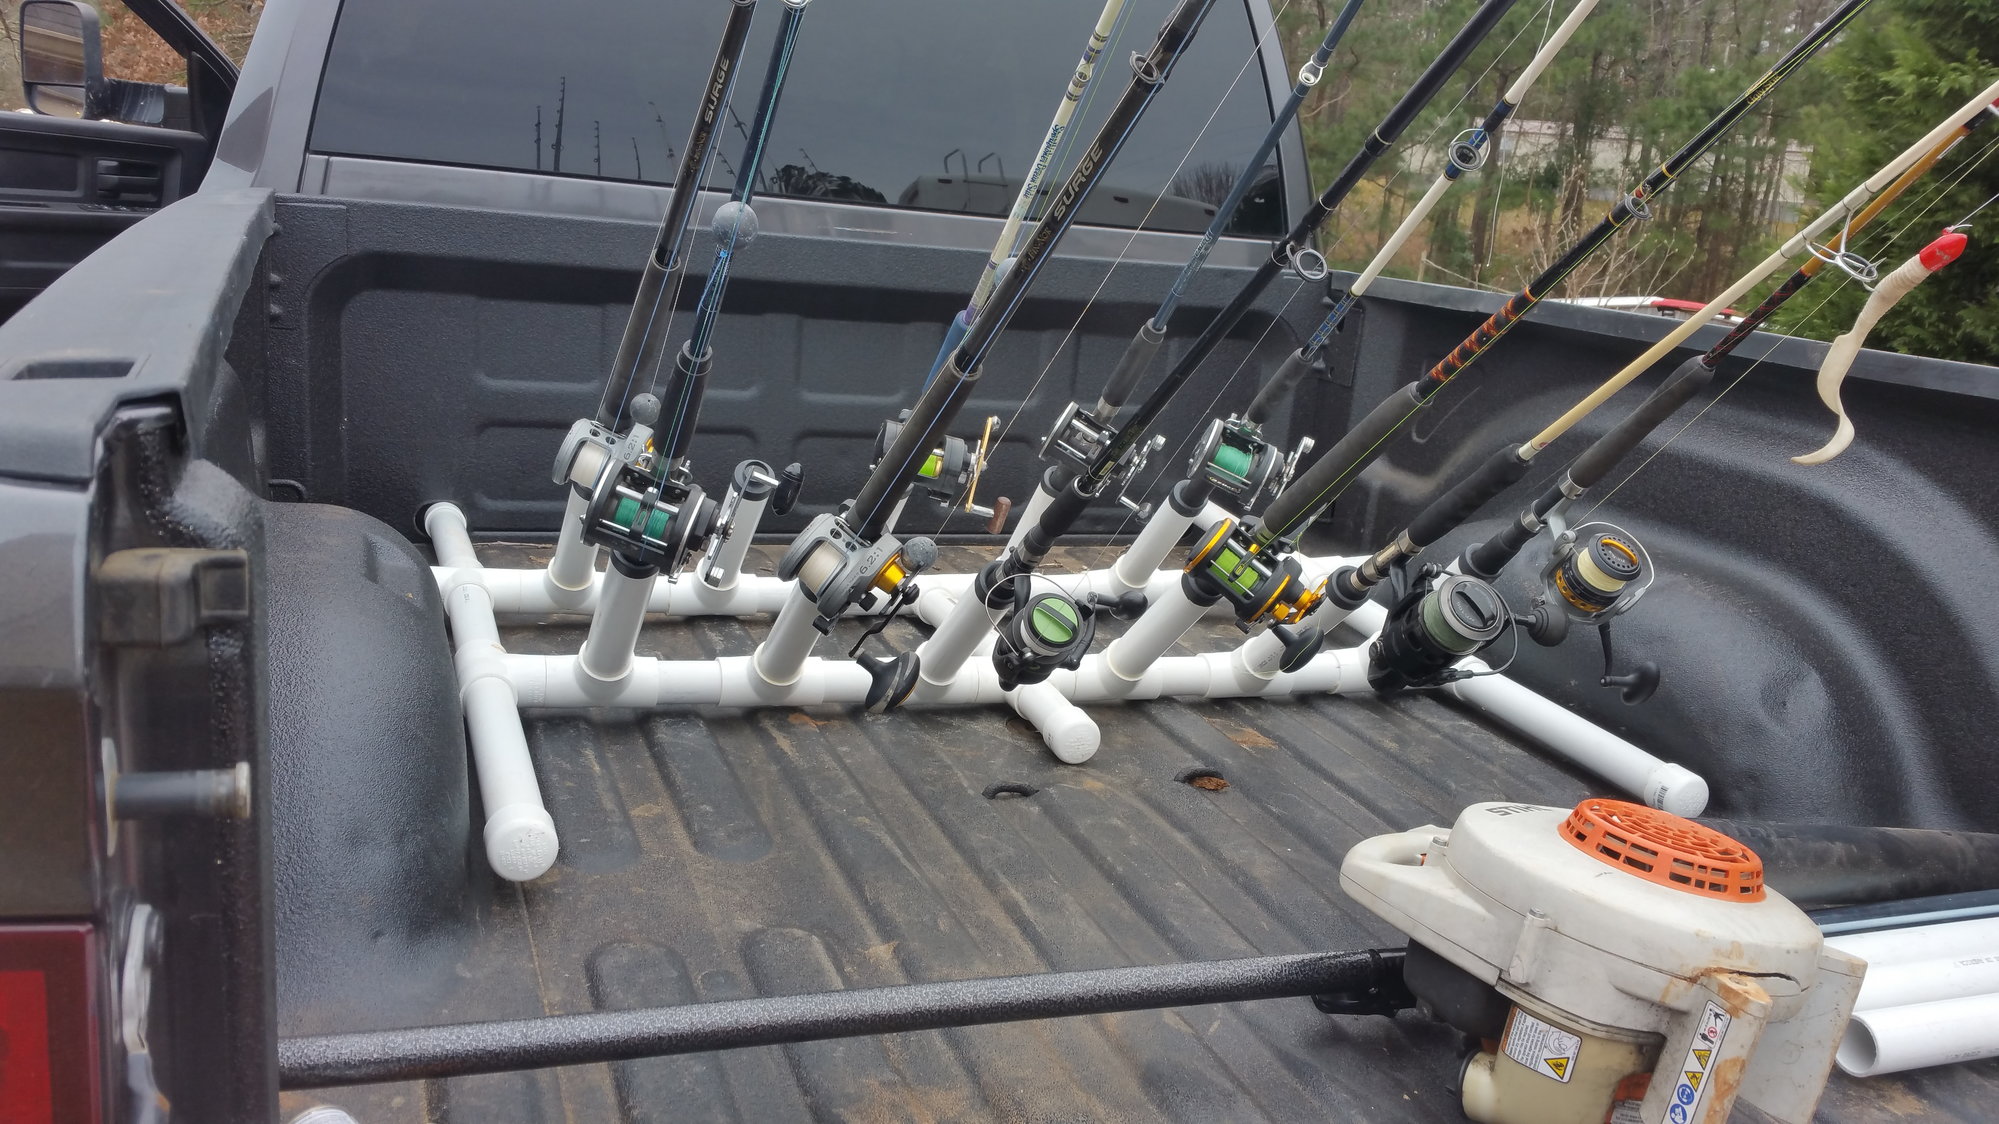 Hitch mounted rod holder - The Hull Truth - Boating and Fishing Forum